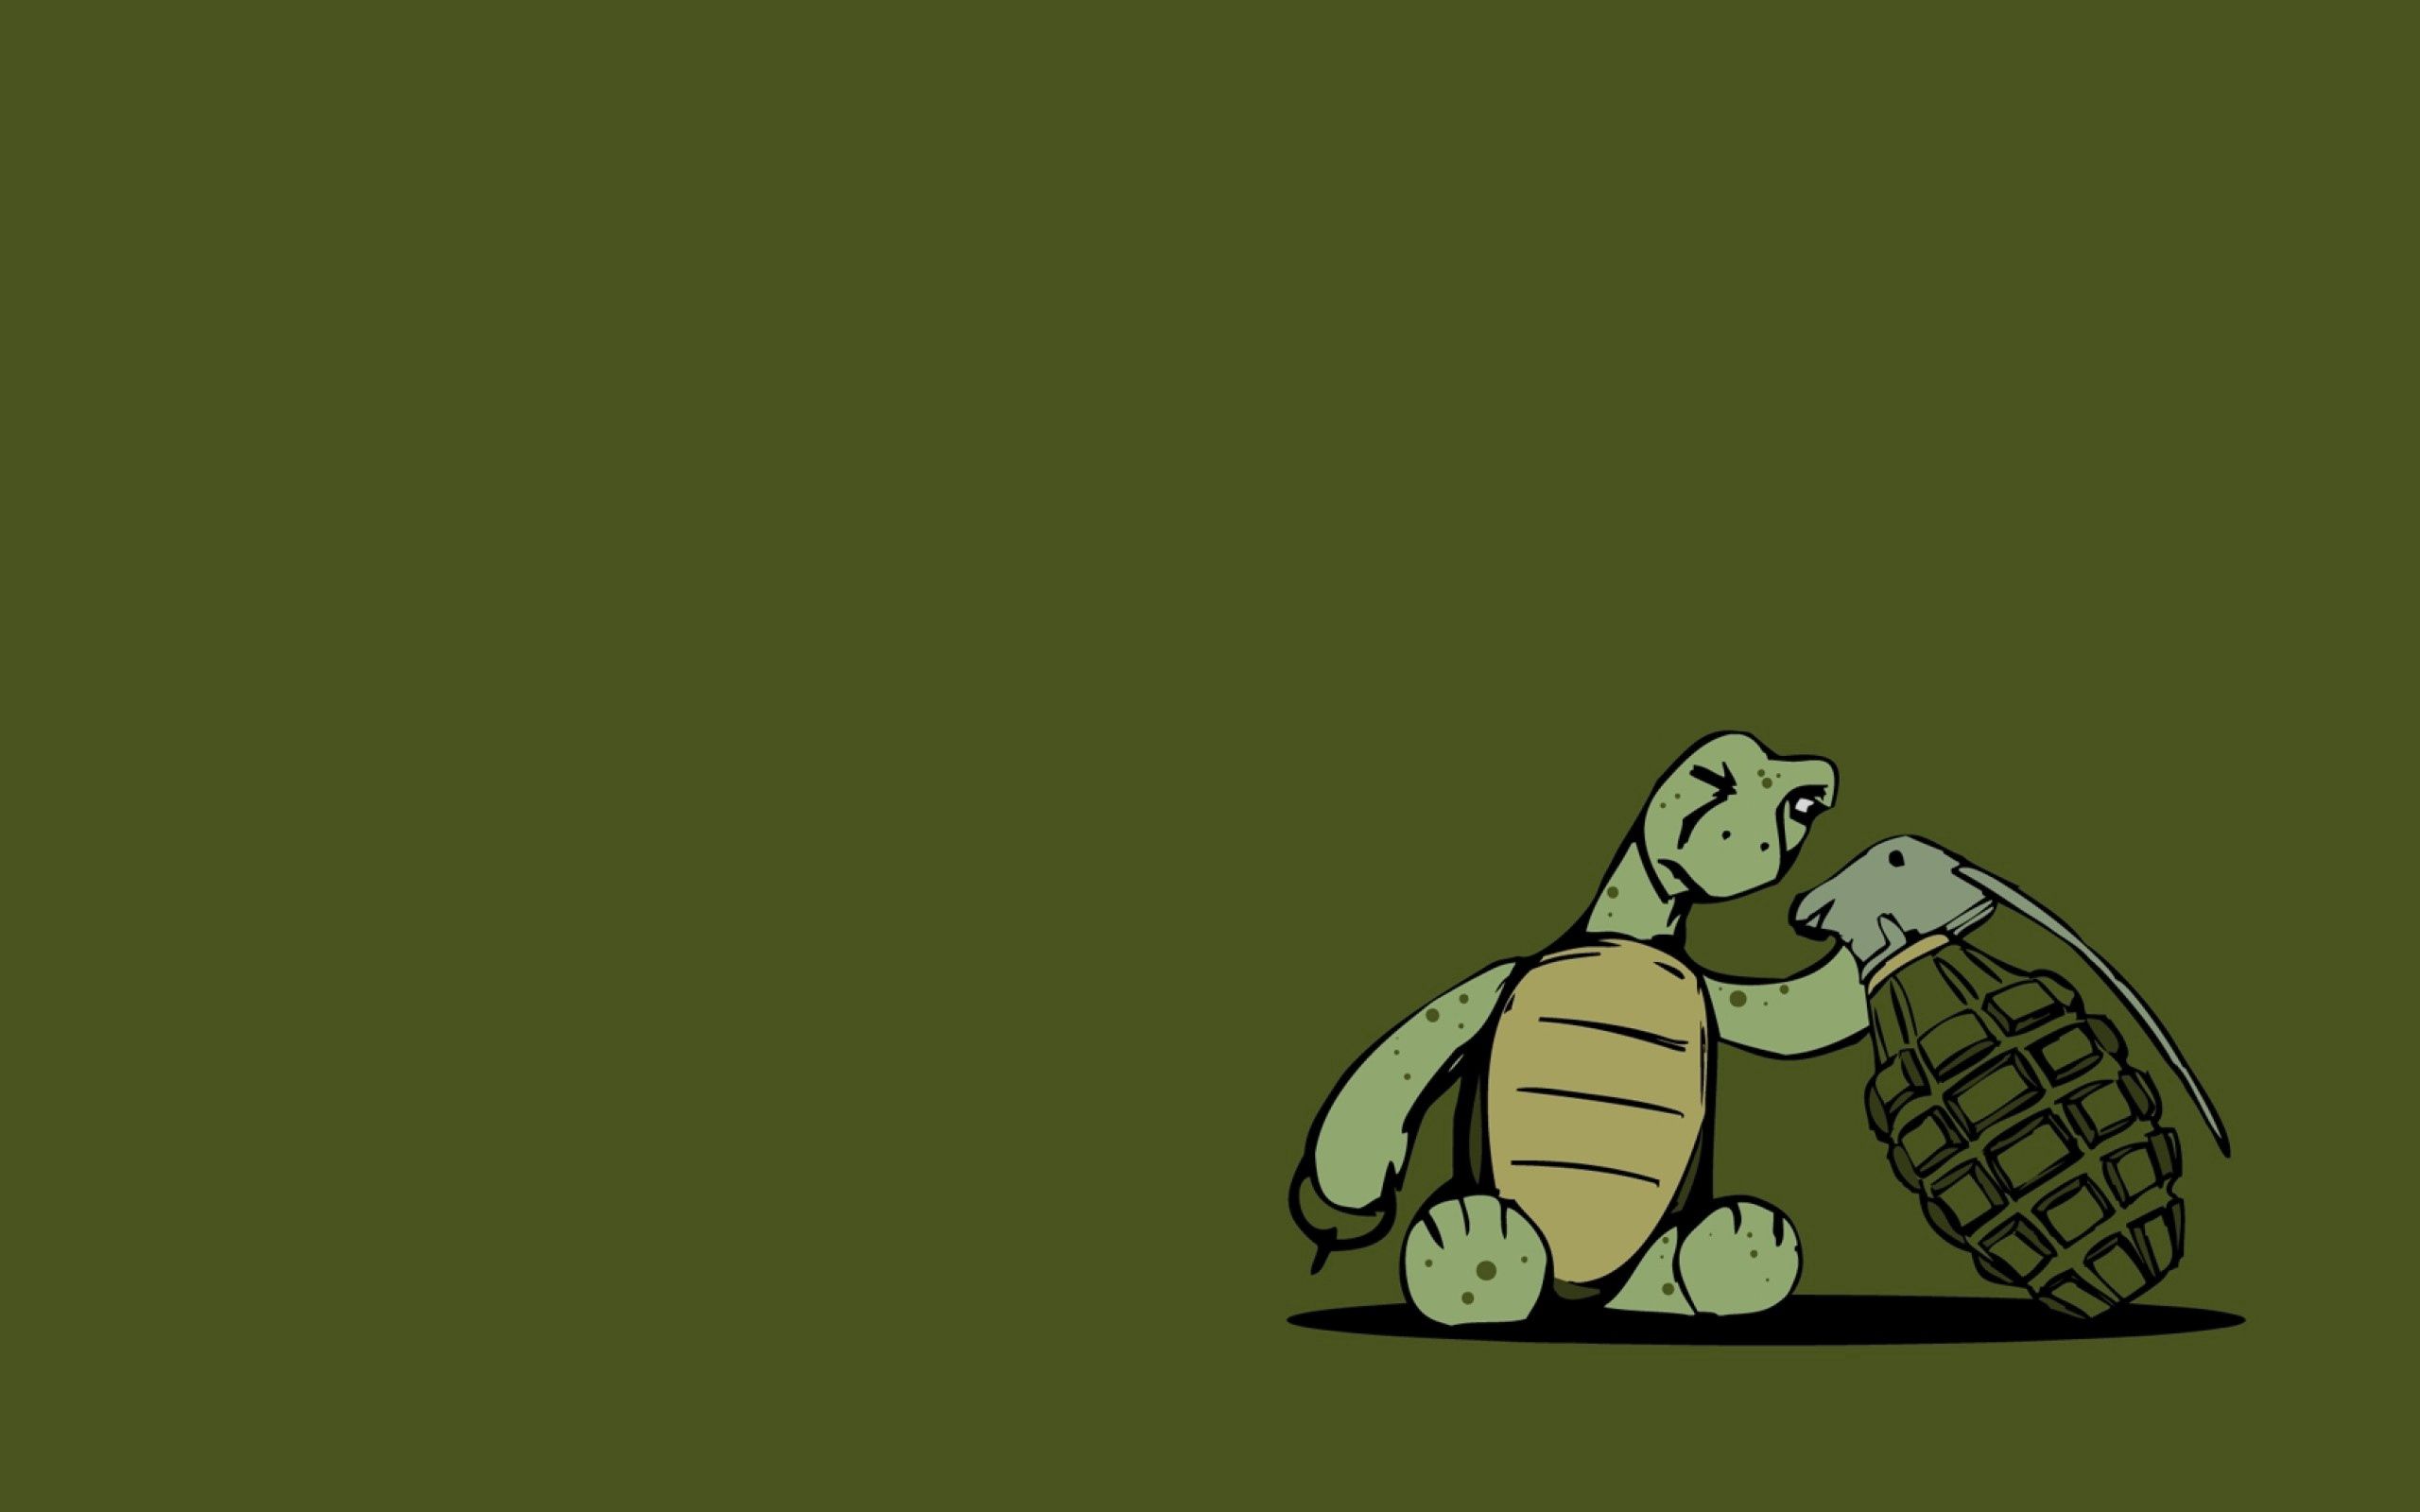 Best Turtle wallpapers for phone screen